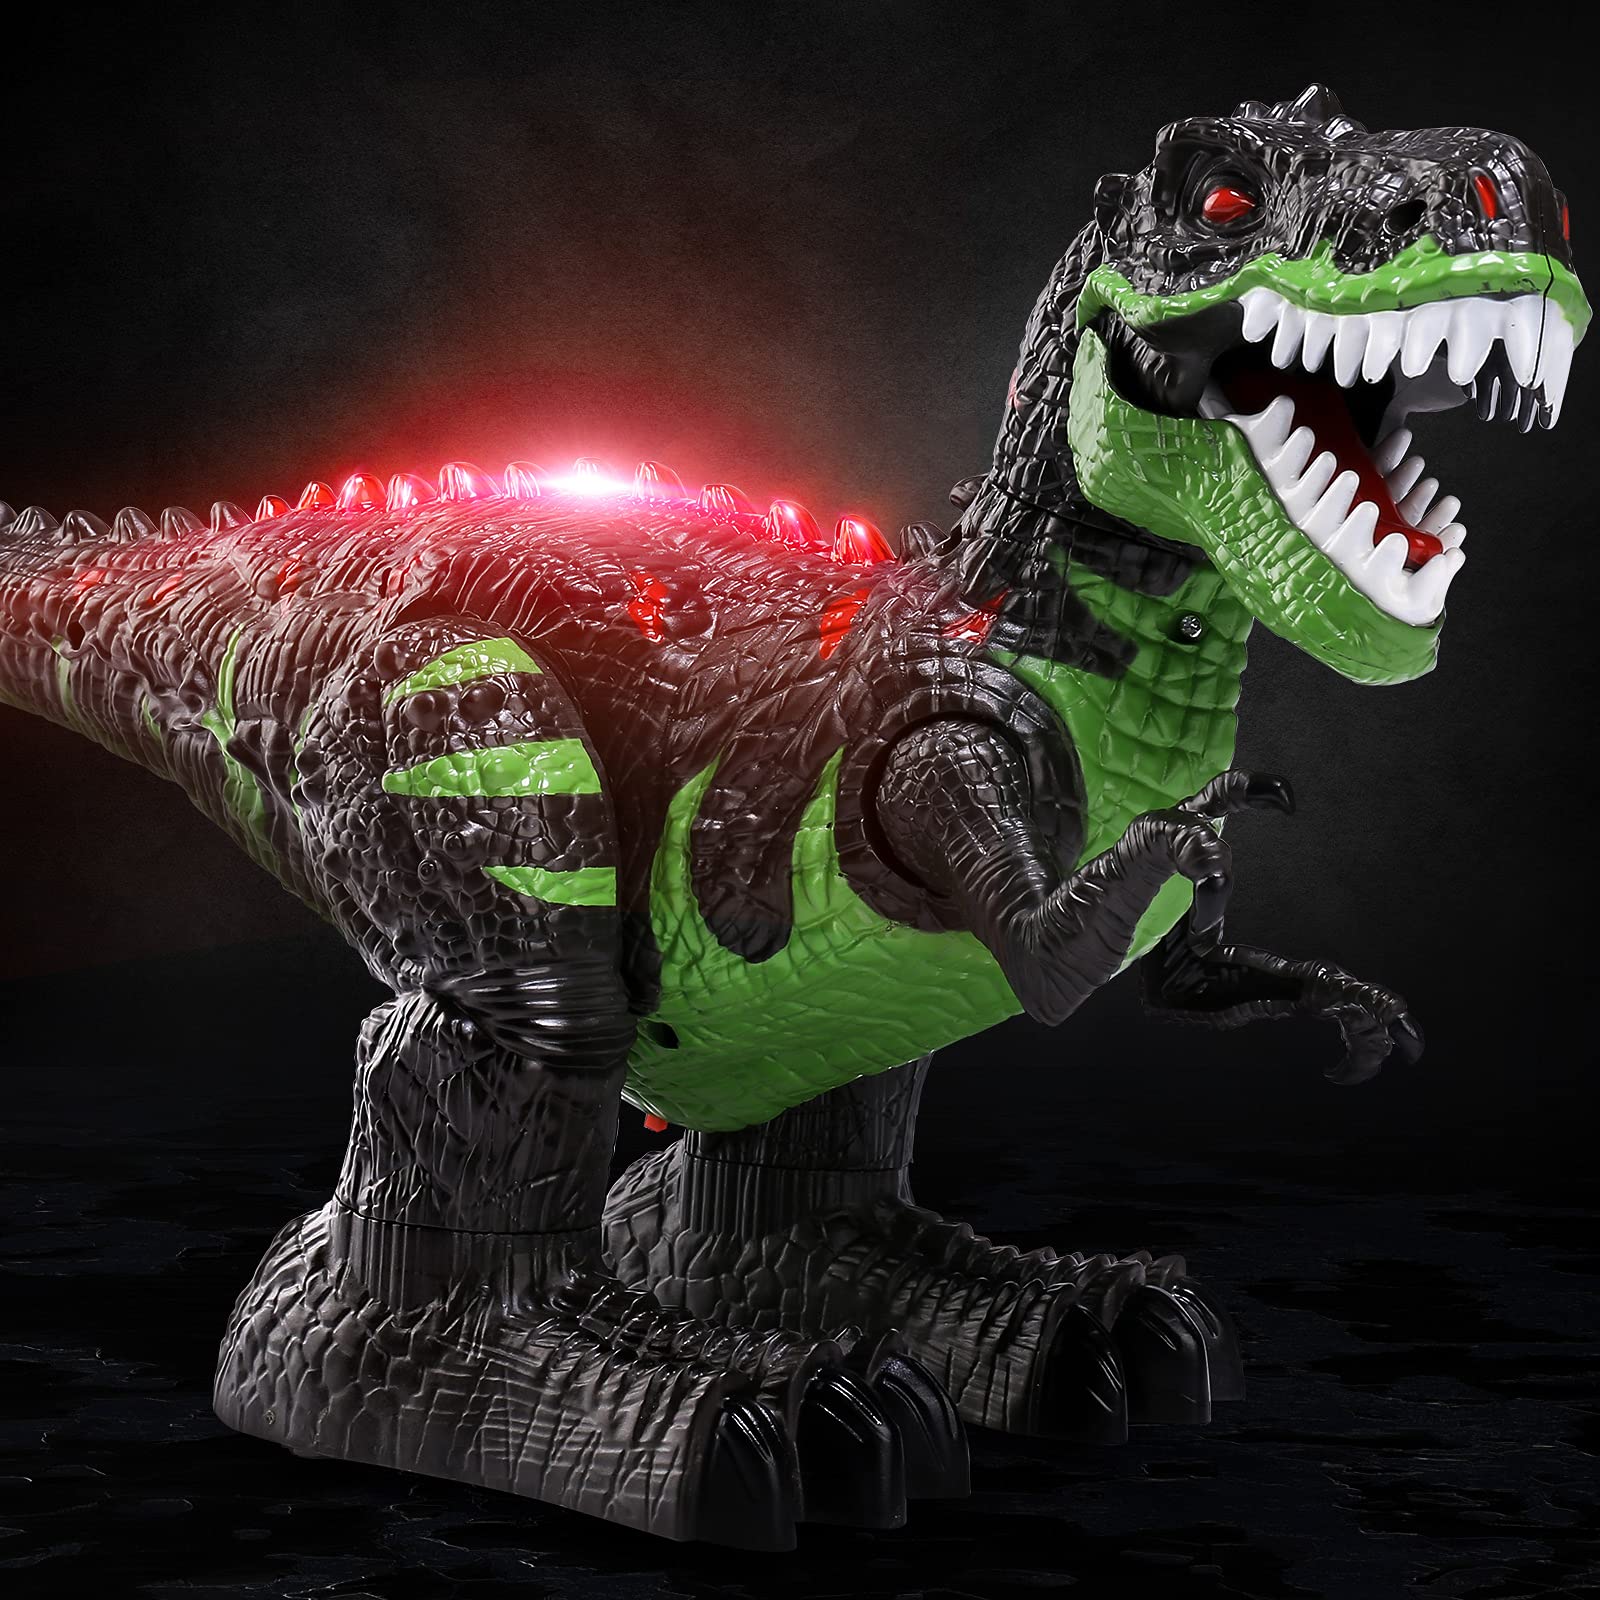 Mua 2.4Ghz Remote Control Dinosaur T-rex Toys for Kids 3-5 Years